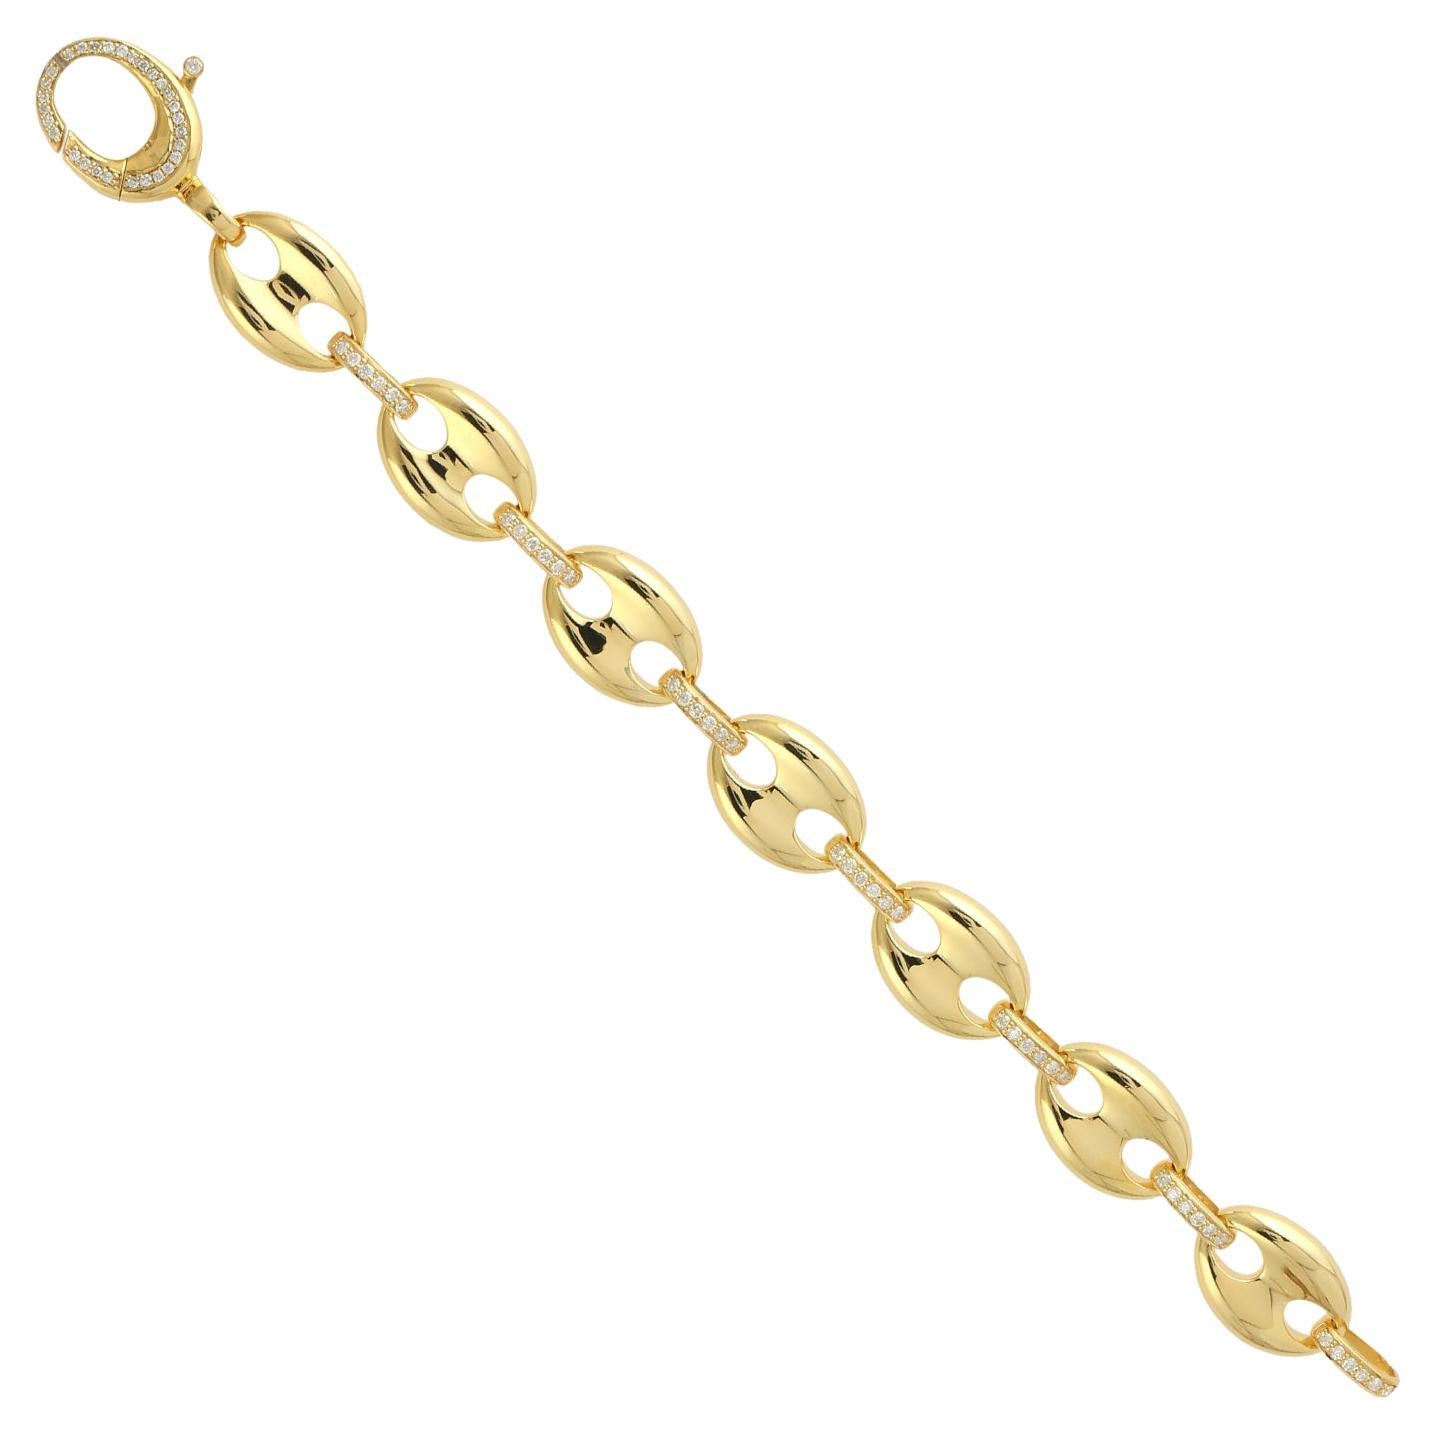 Pave Diamond Link Bracelet Made In 14K Yellow Gold For Sale